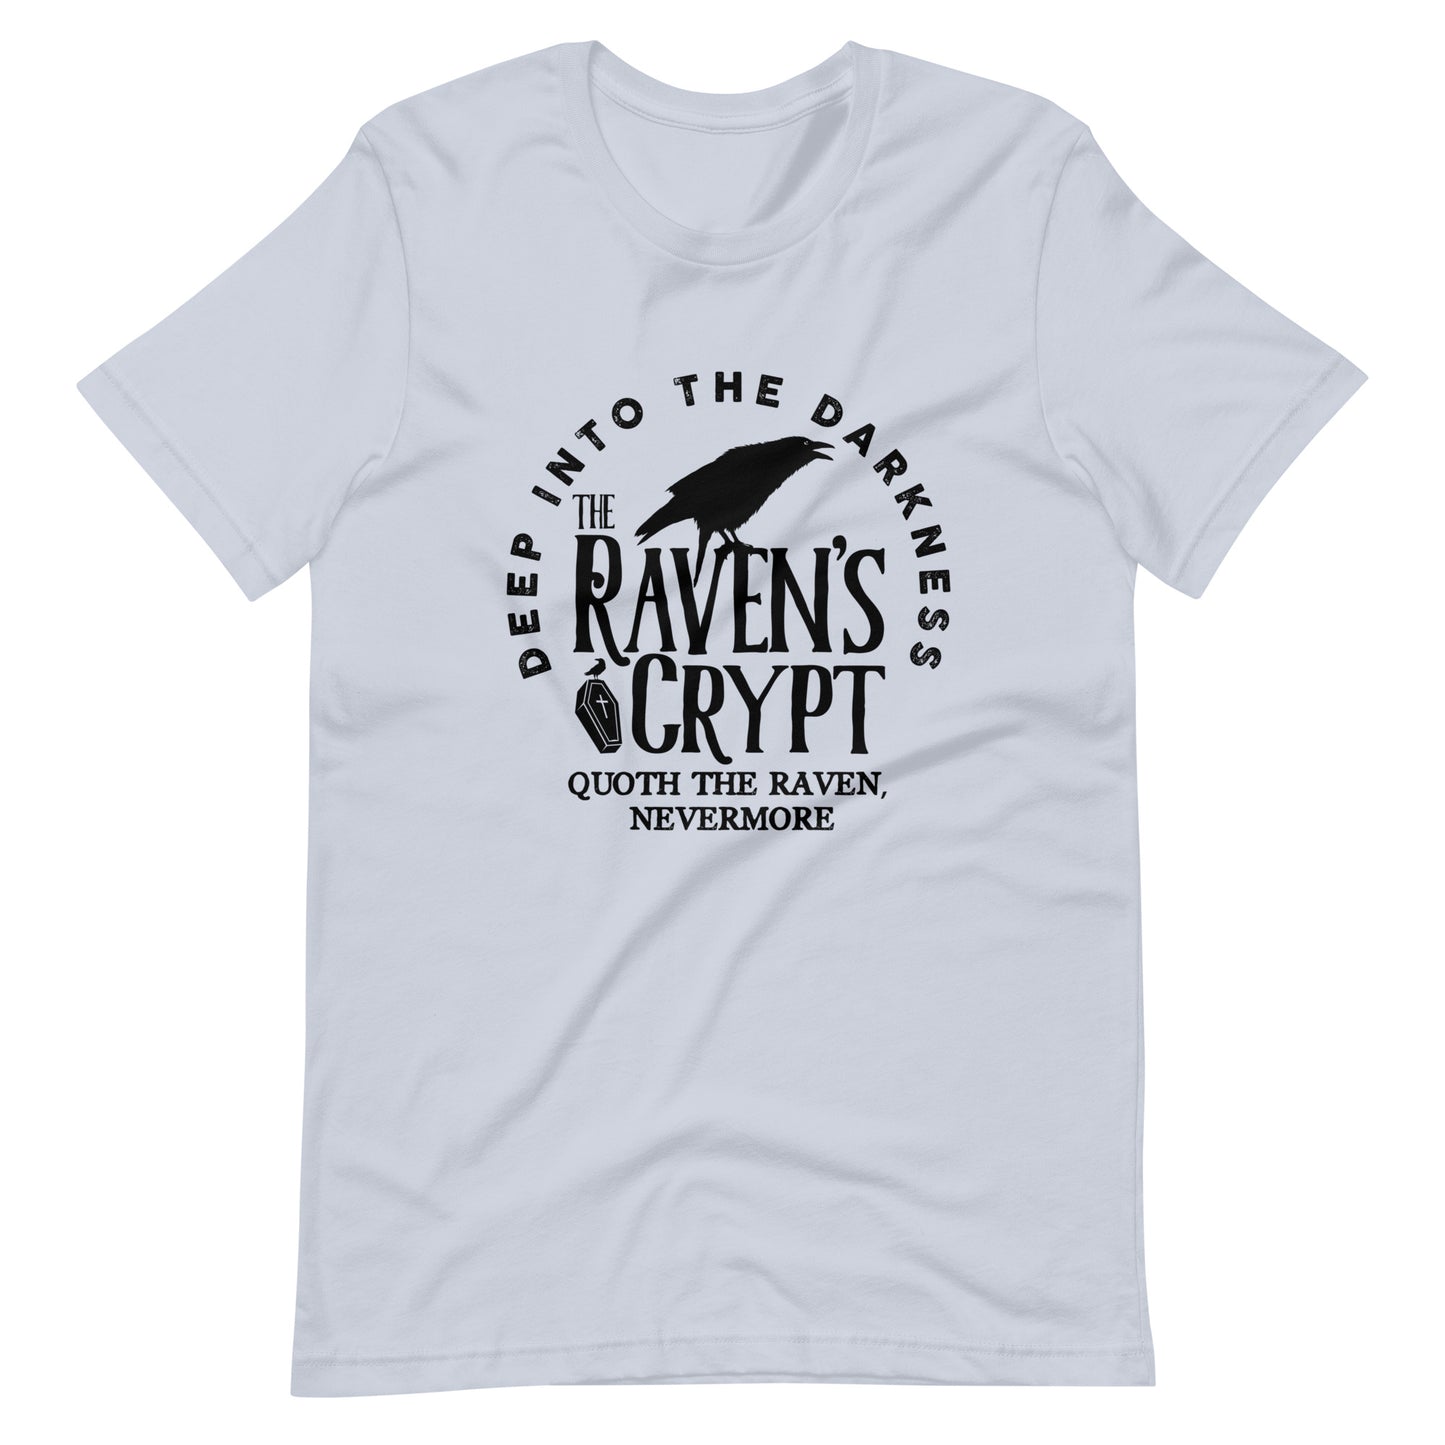 Deep Into the Darkness The Raven's Crypt - Men's t-shirt - Light Blue Front